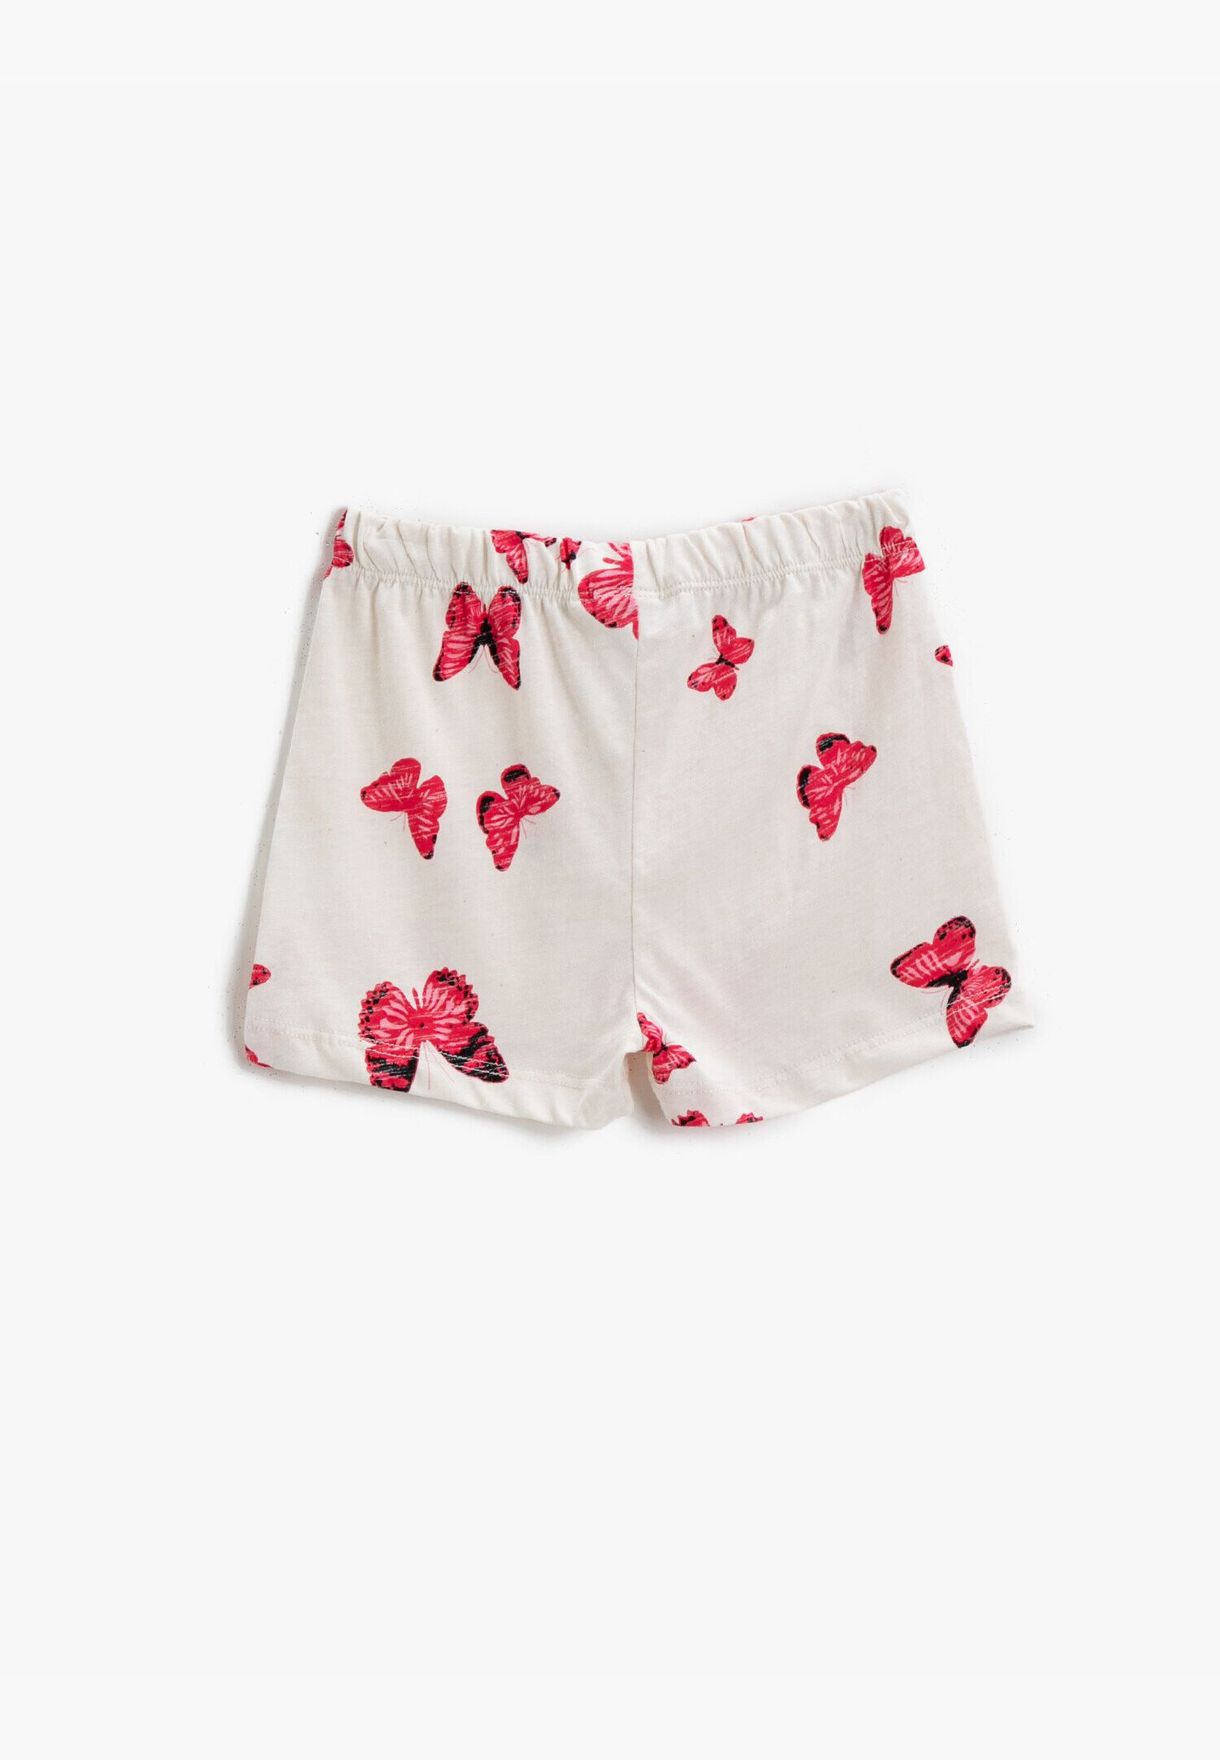 Butterfly Printed Shorts Cotton